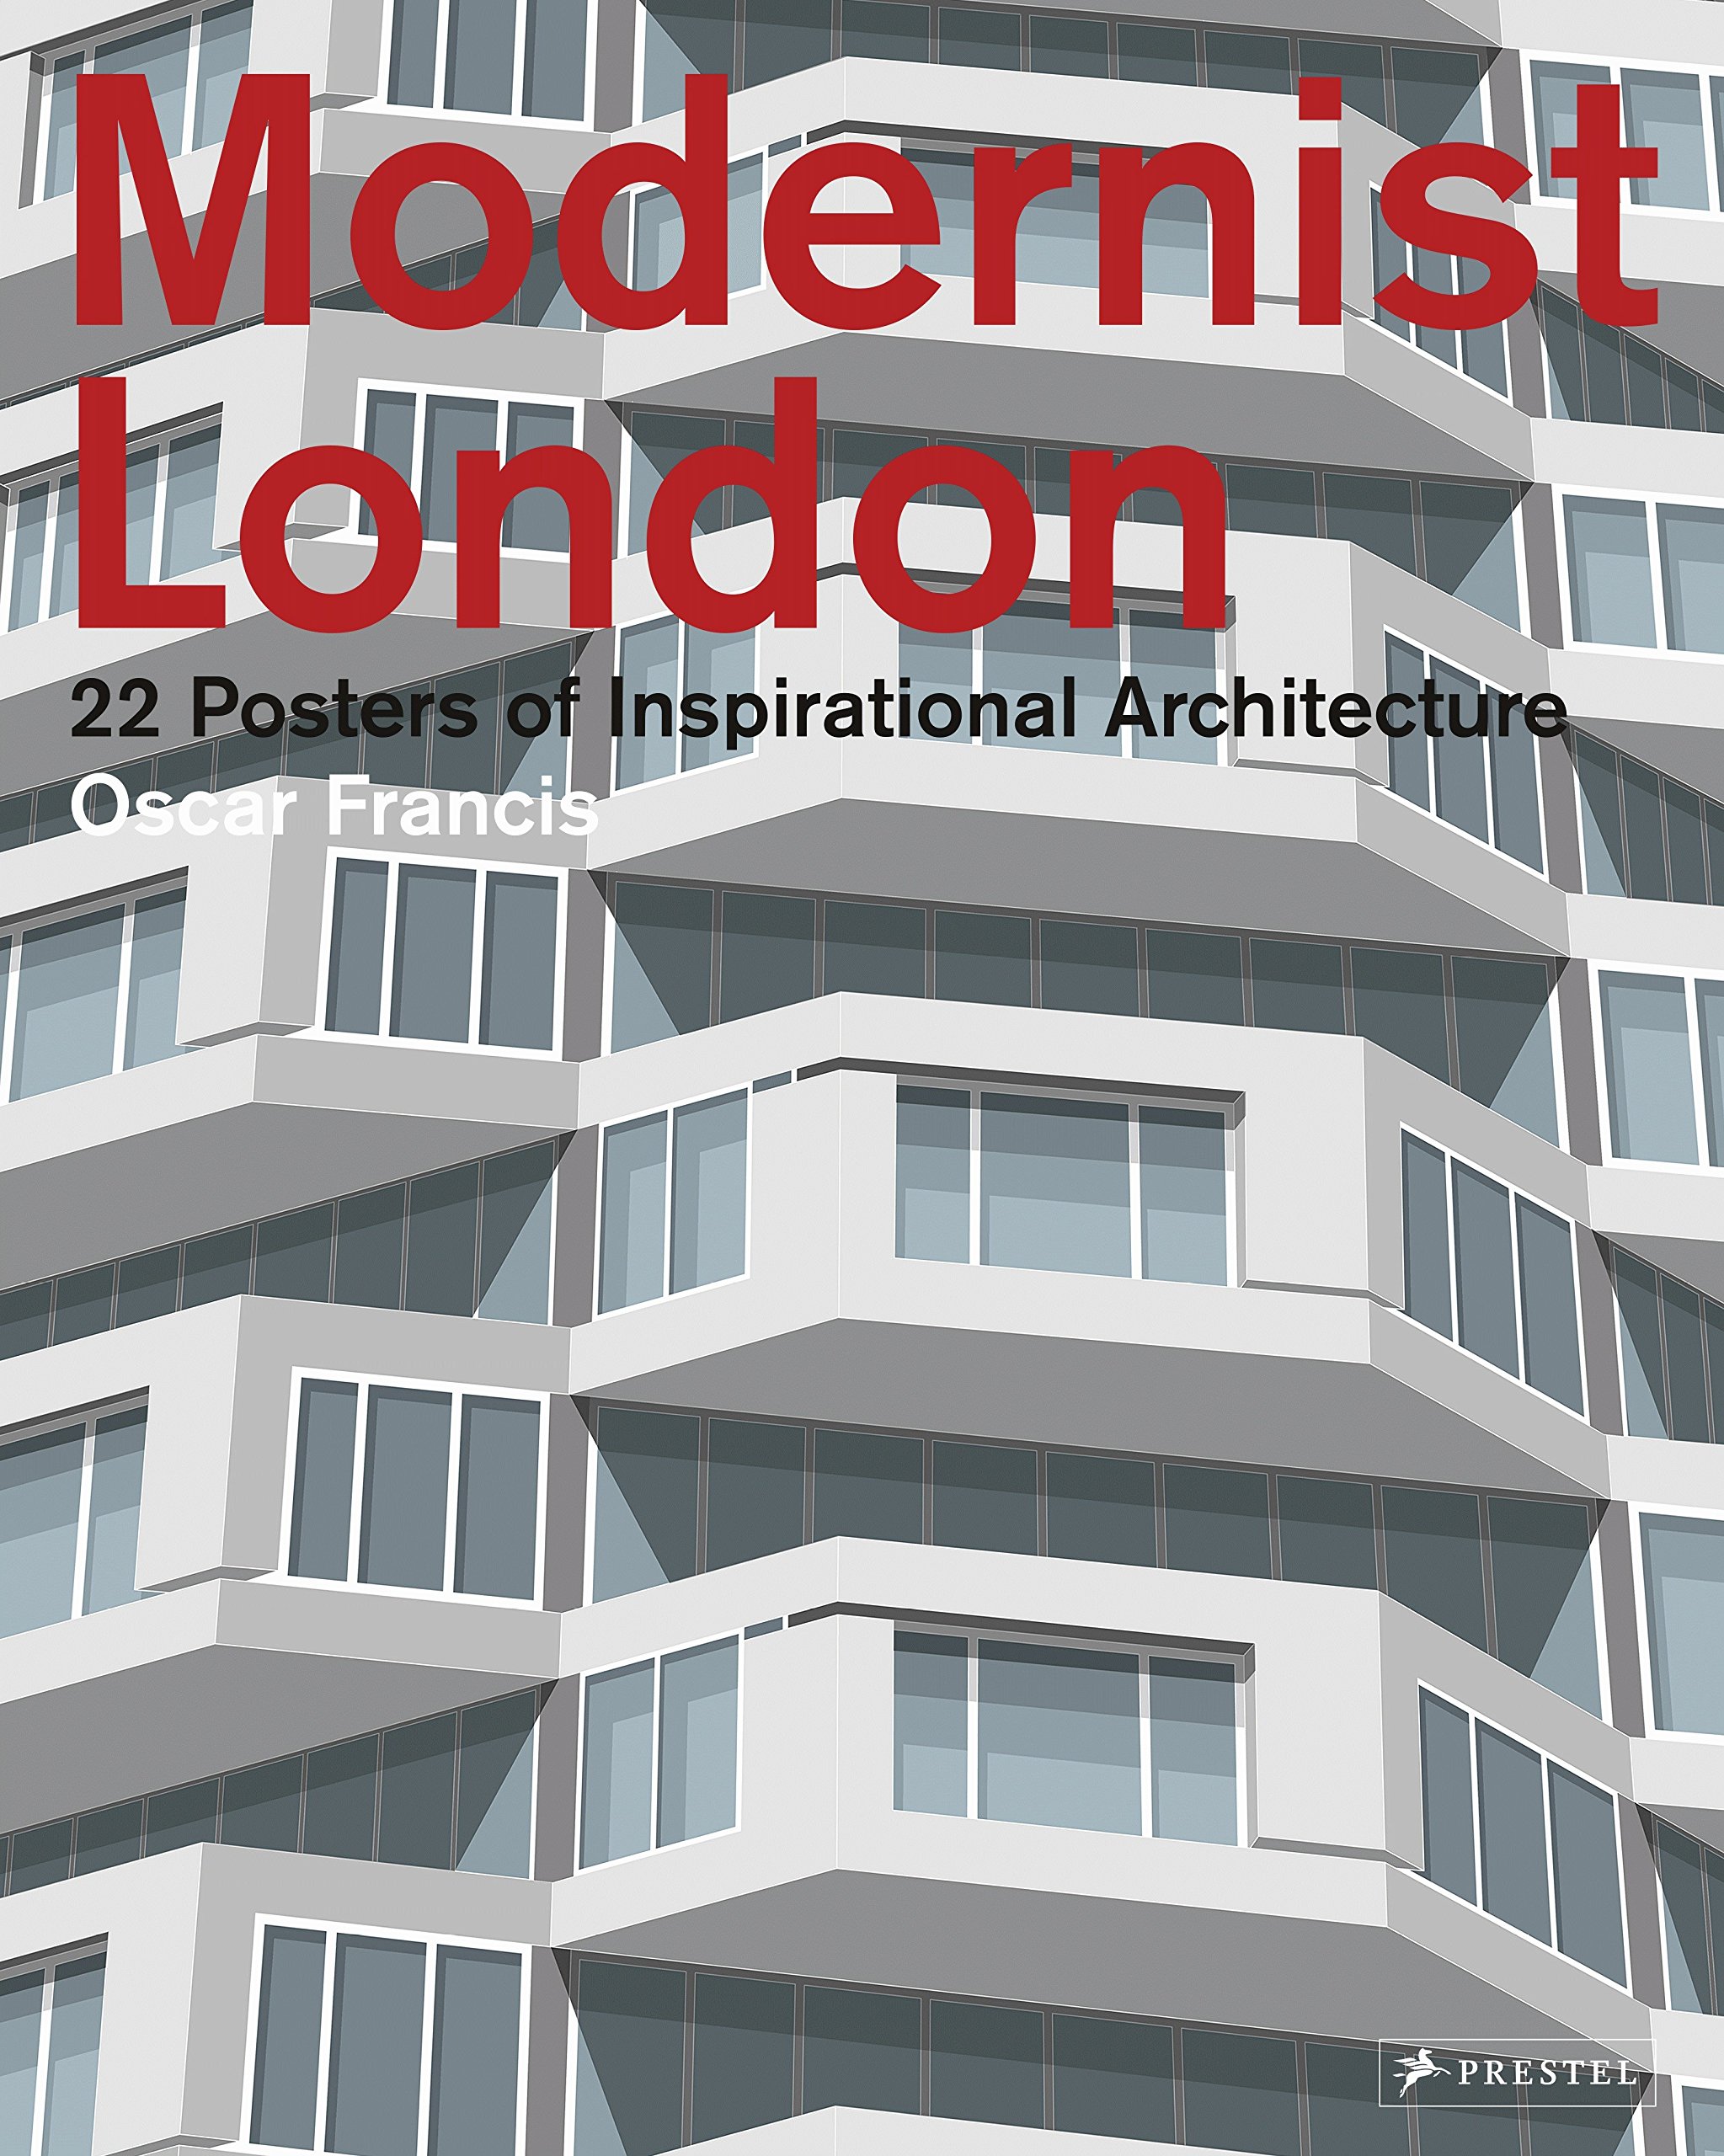 Modernist London: 22 Posters of Inspirational Architecture